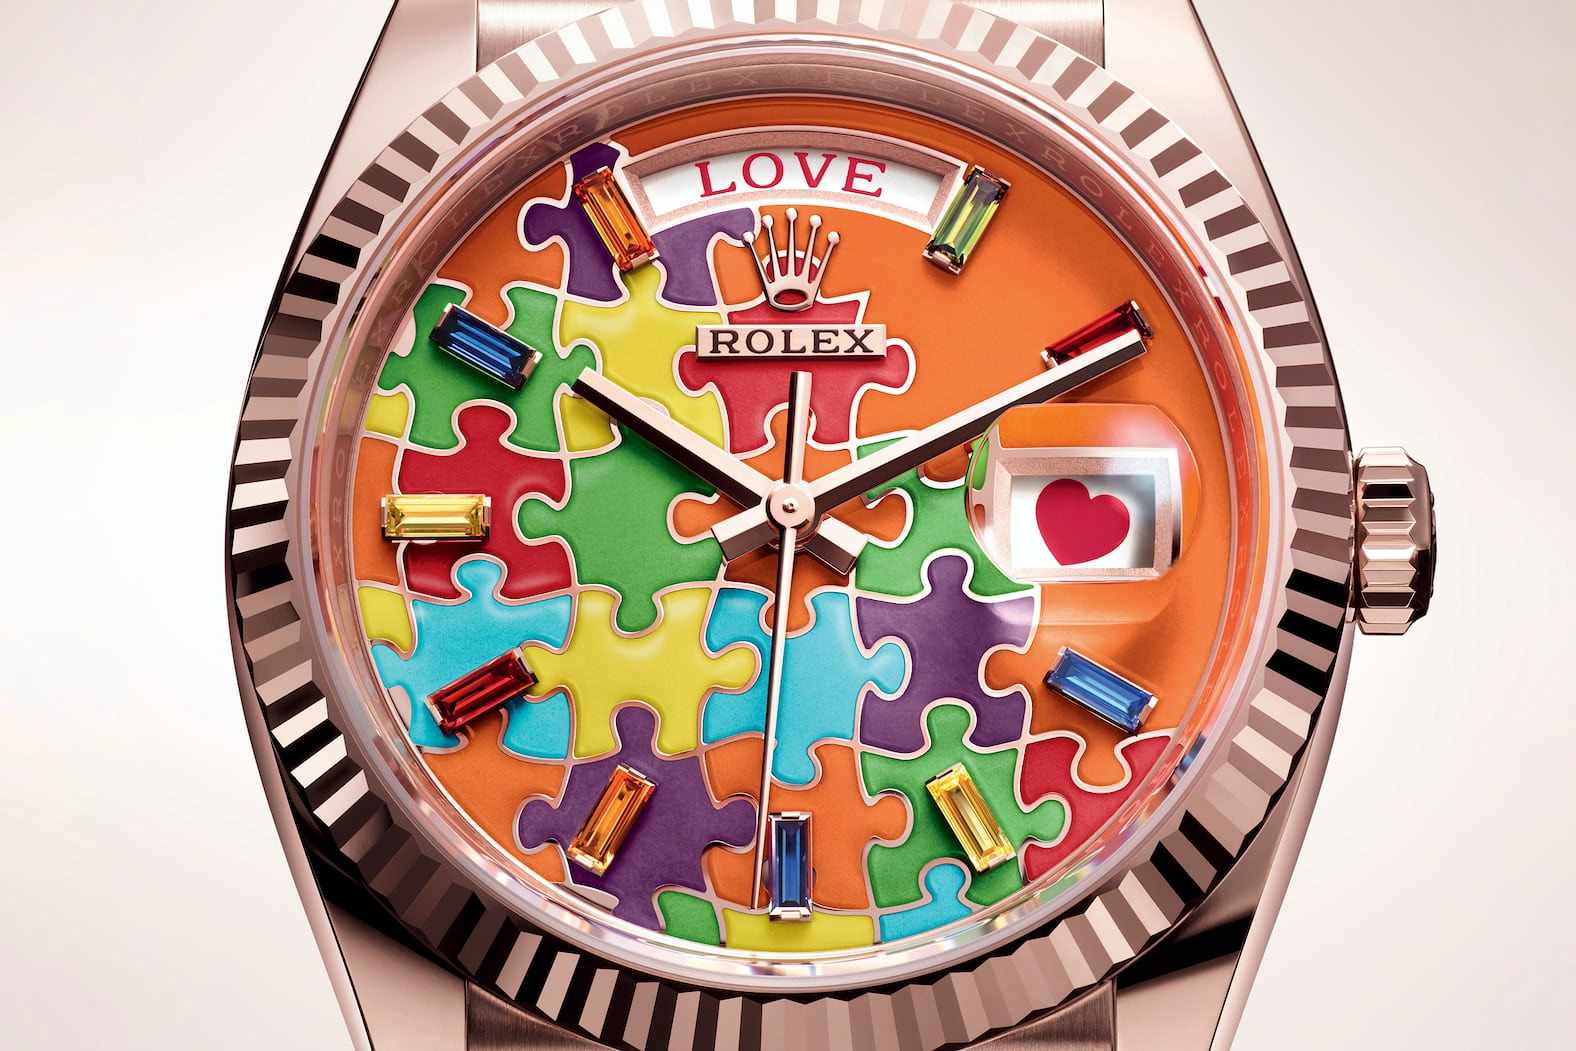 Rolex's Jigsaw "Emoji" Day-Date watch has a colorful puzzle piece face